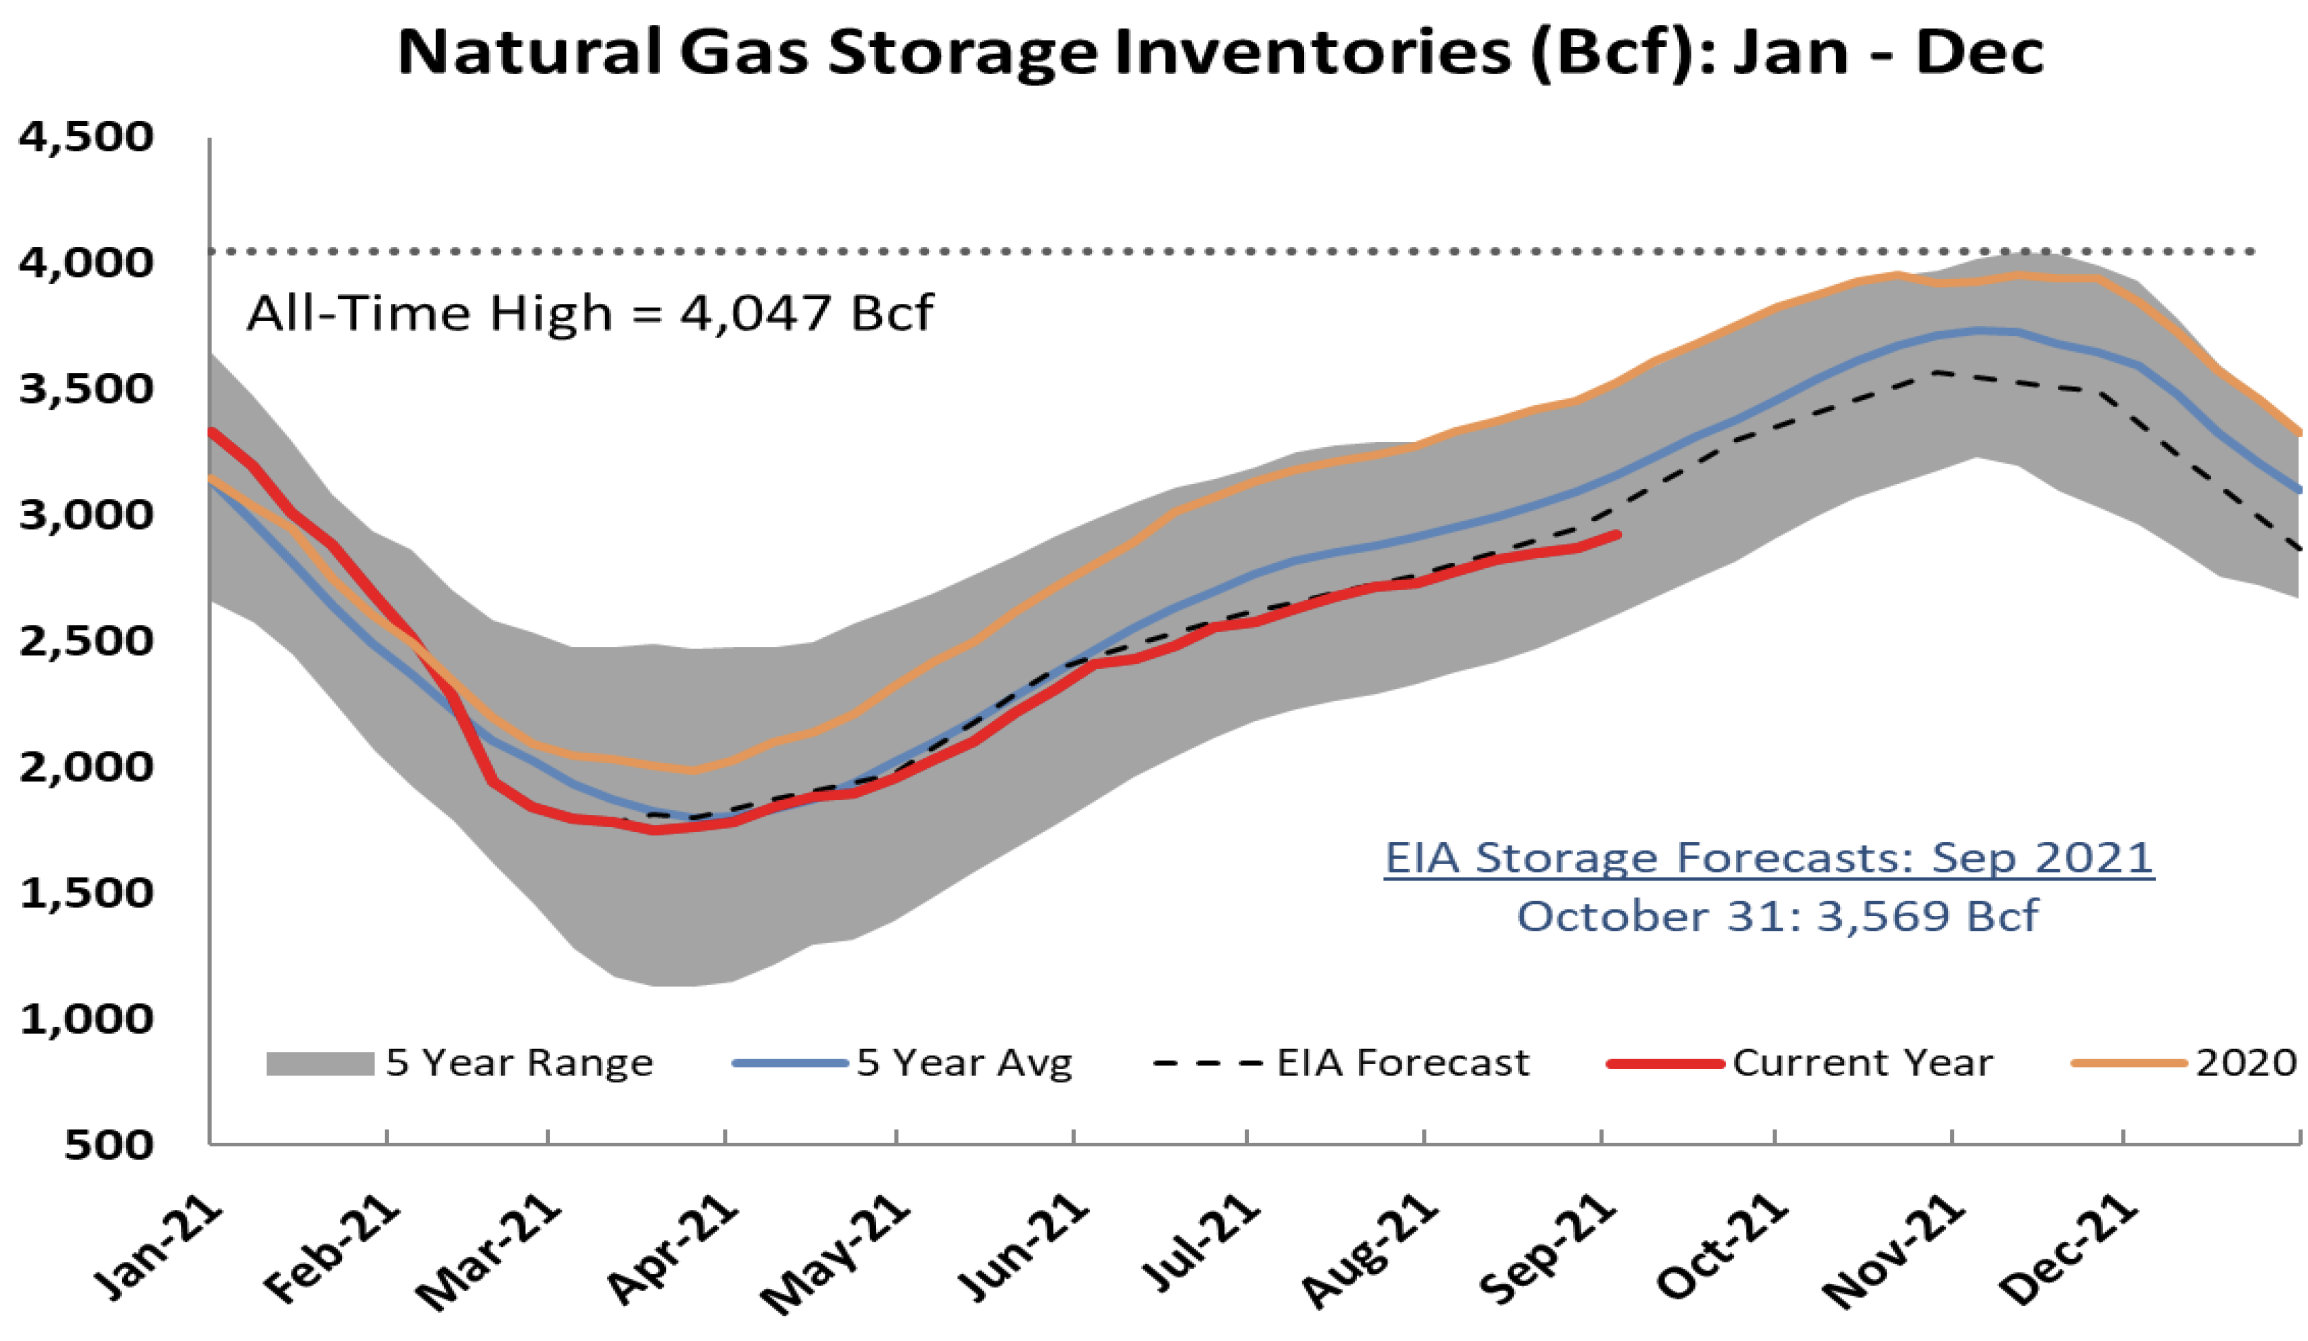 Natural Gas Storage Inventories over Time